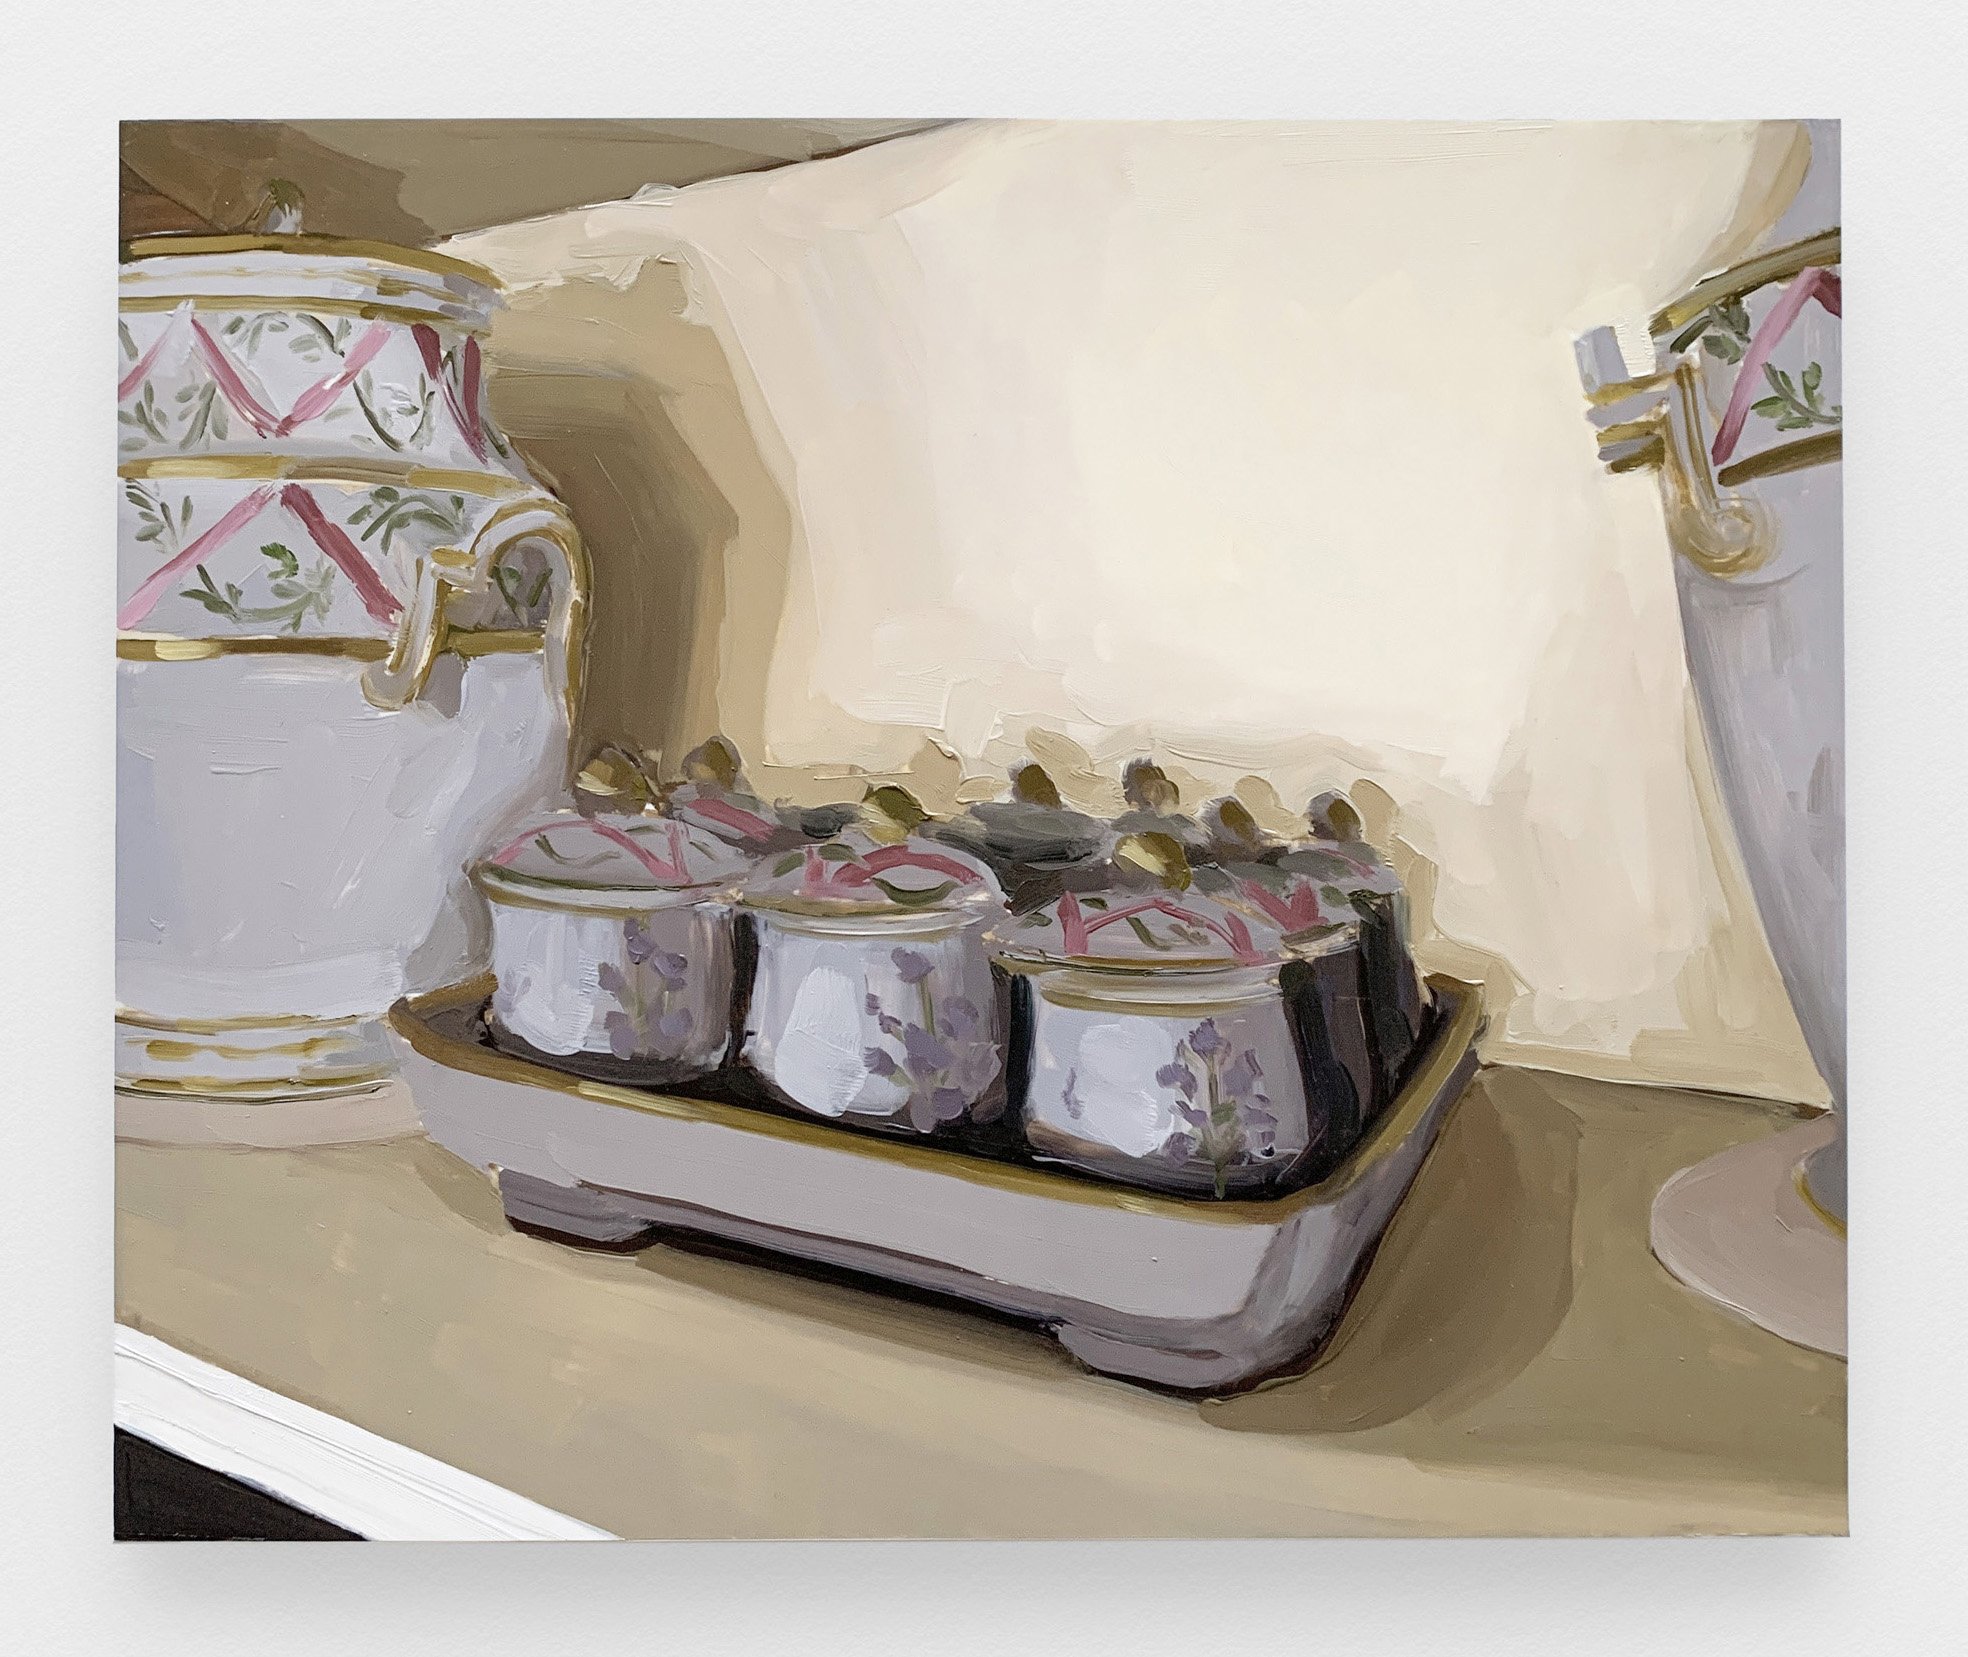  Carrie Mae Smith Pot De Crème Set On Stand 2021 Oil on Mylar mounted on panel 14h x 17w in 35.56h x 43.18w cm 